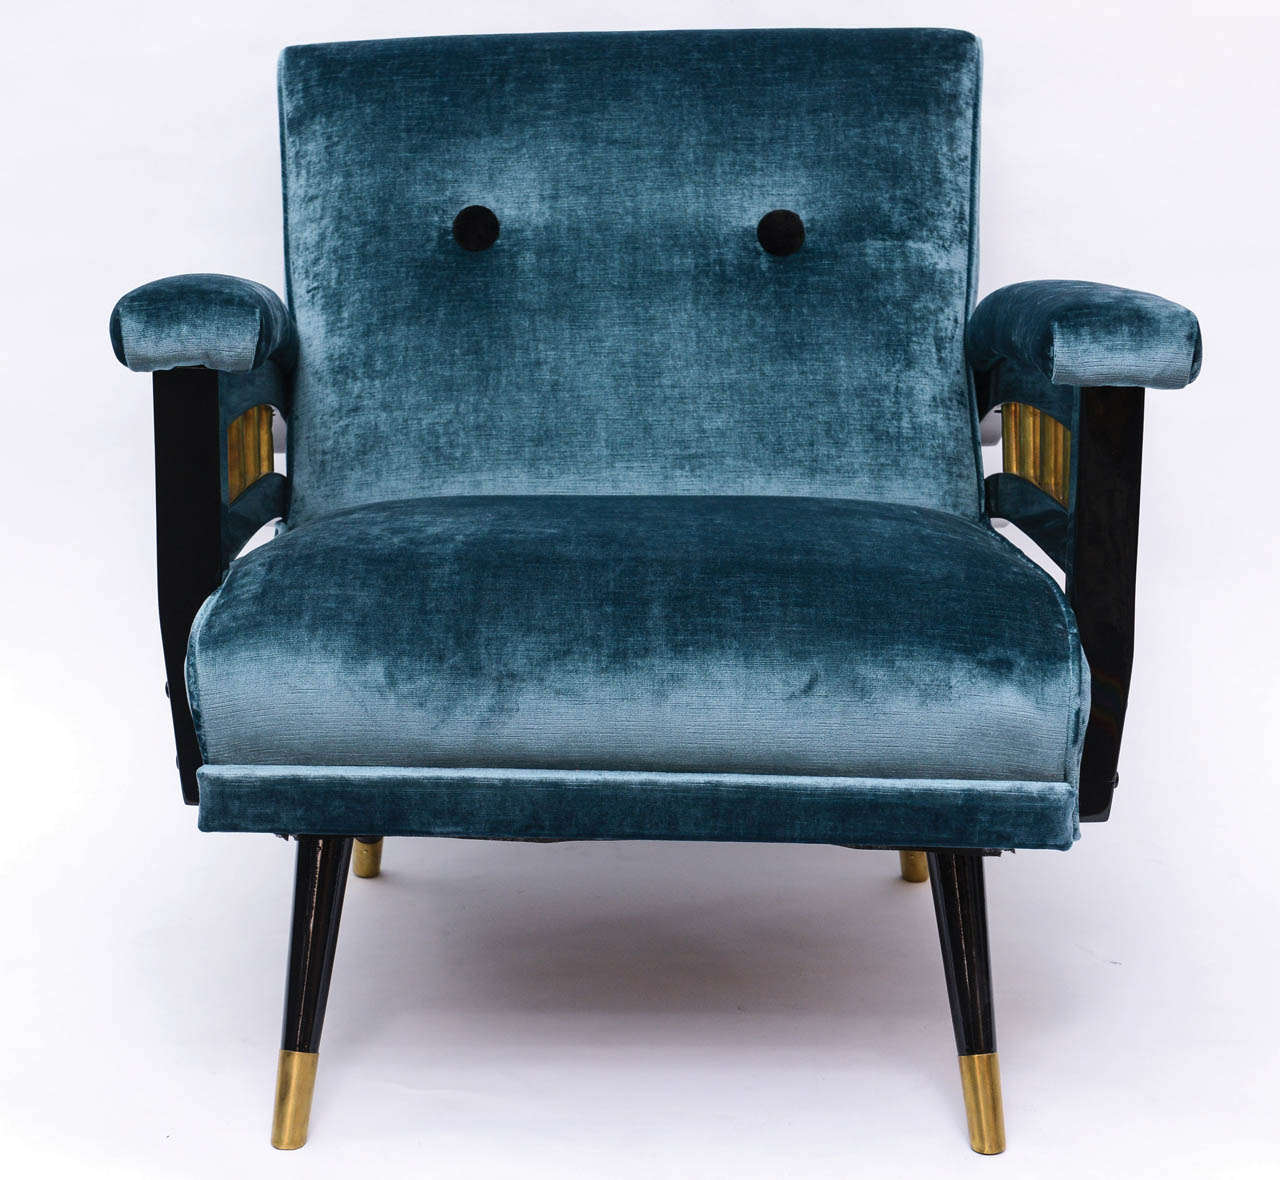 The chair wore blue velvet... wore it well.  
Recently redone in blue and black high gloss Polyurethane lacquer, this stunning rocking chair has been reupholstered and lacquer with the brass beautifully polished by our Furniture Restoration